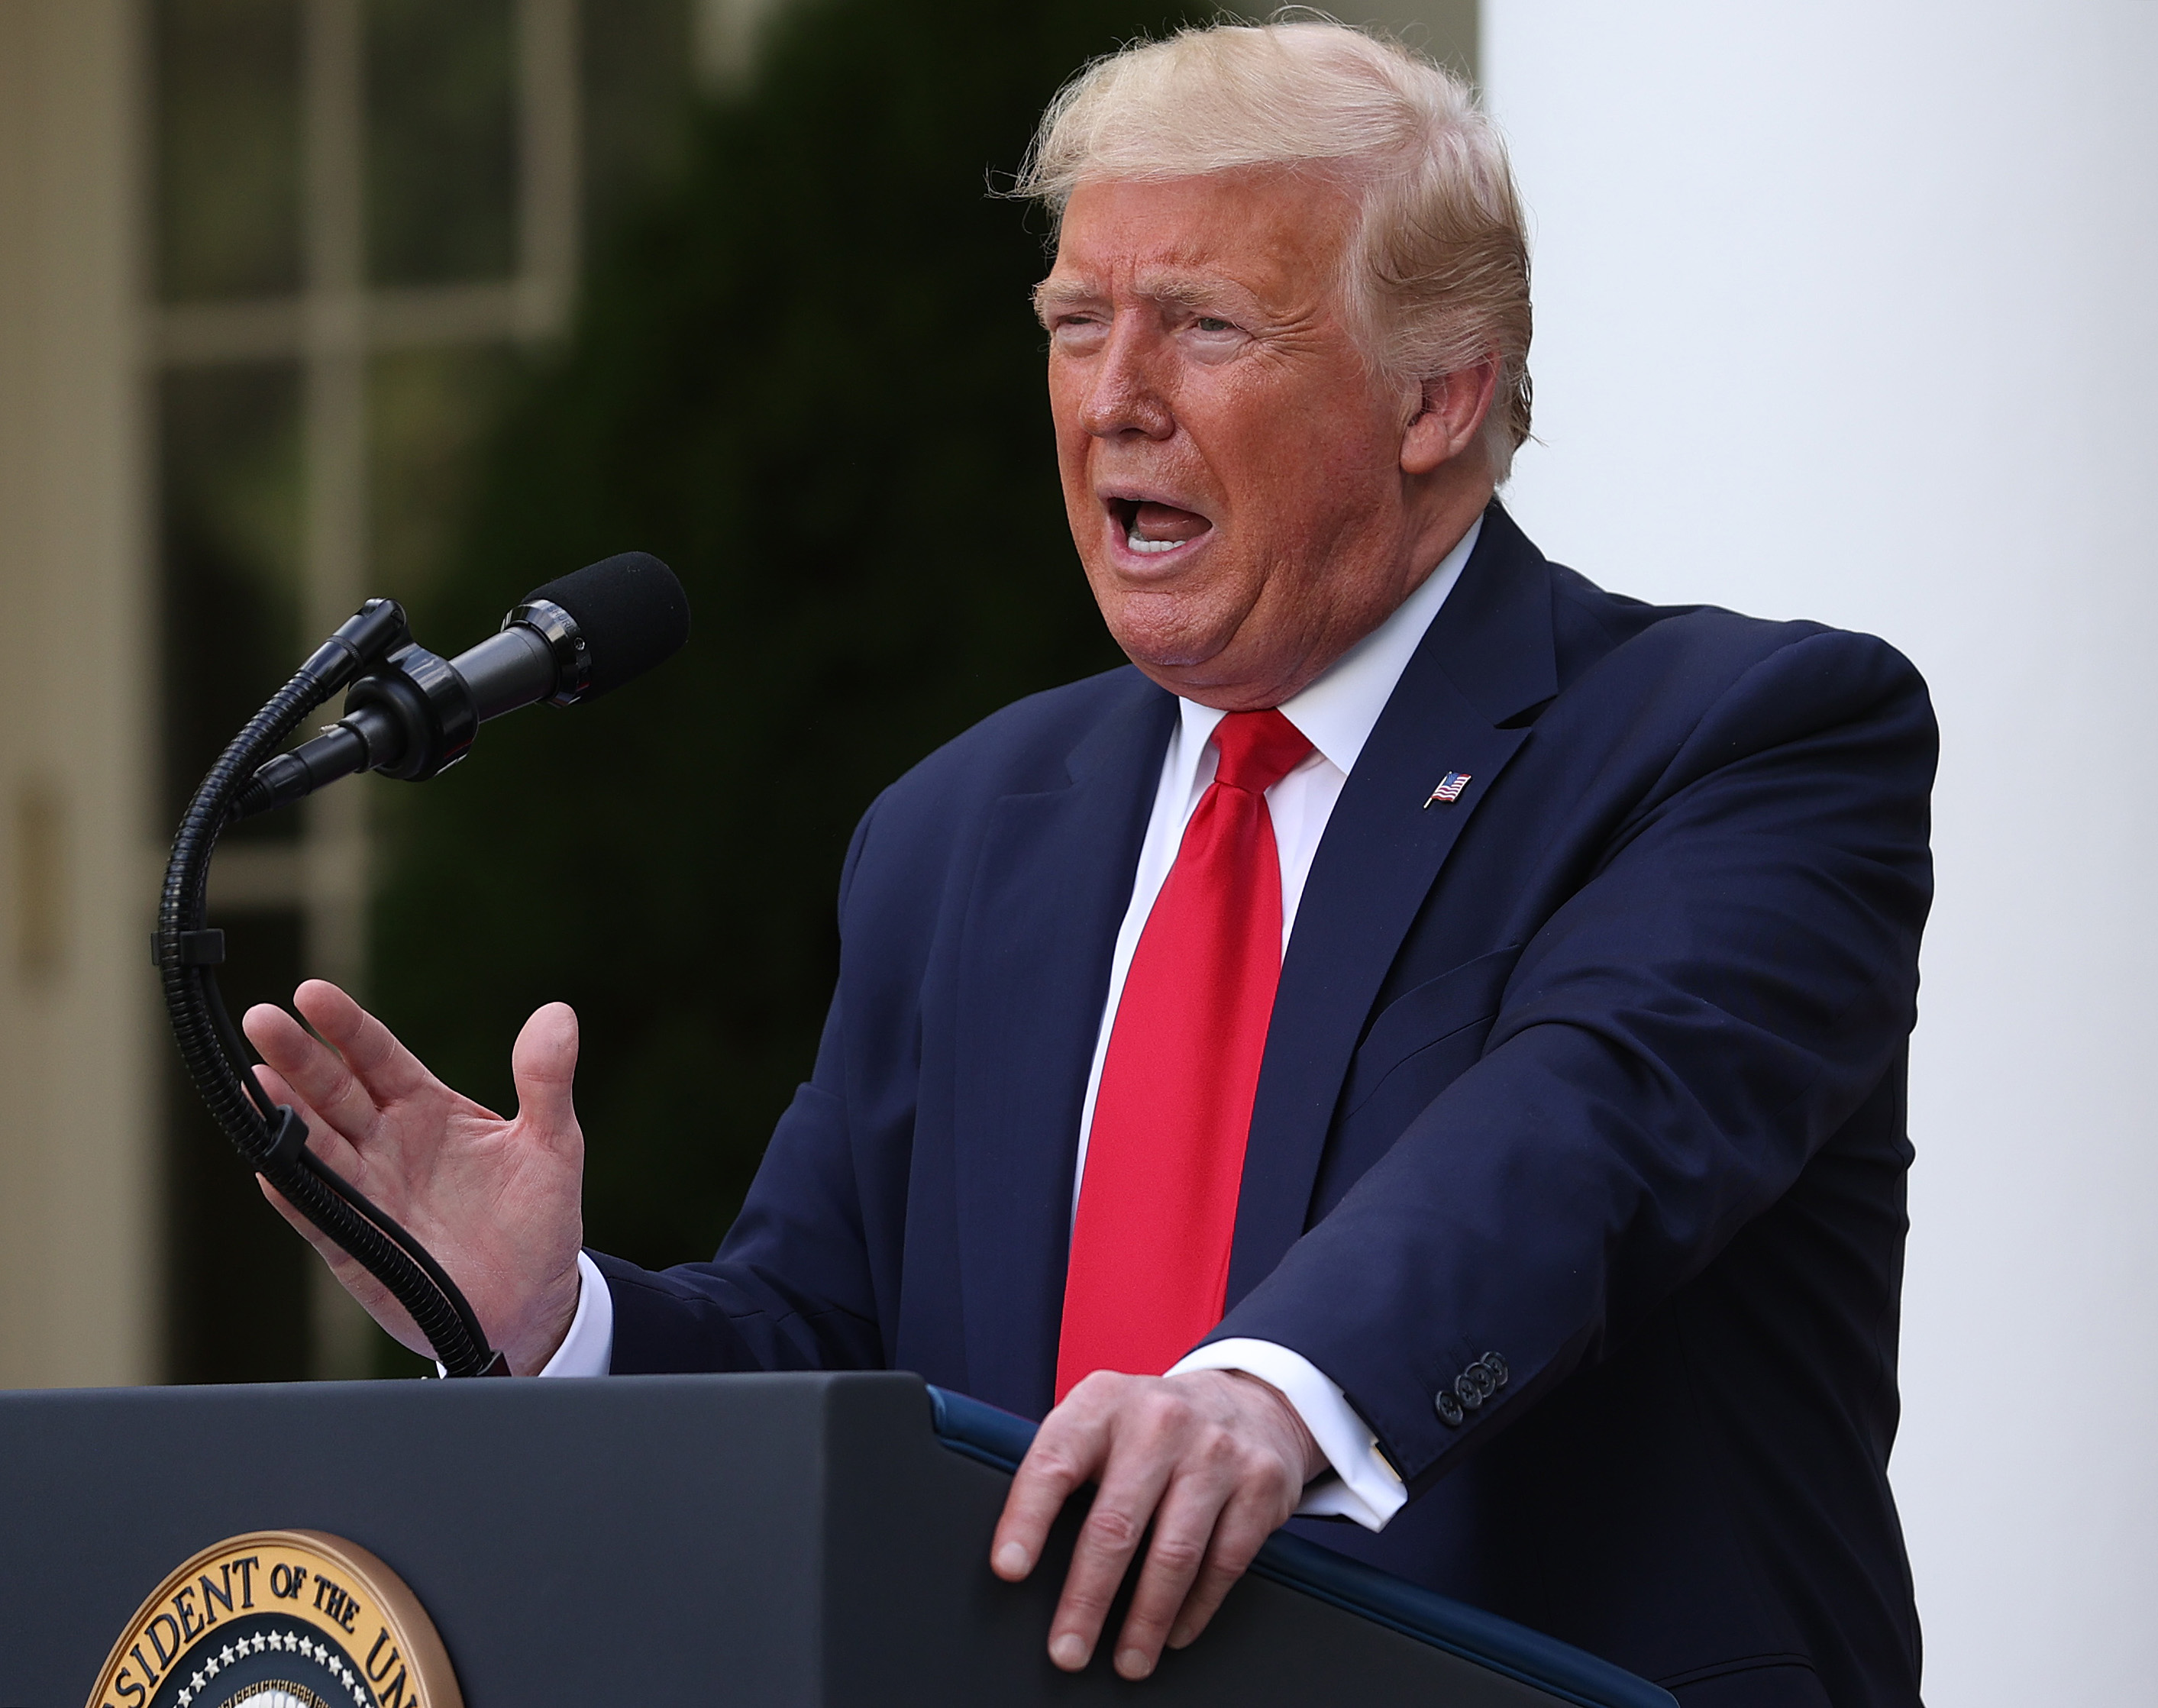 U.S. President Donald Trump makes remarks during an event on protecting seniors with diabetes, in the Rose Garden at the White House on May 26, 2020 in Washington, DC. (Win McNamee/Getty Images)